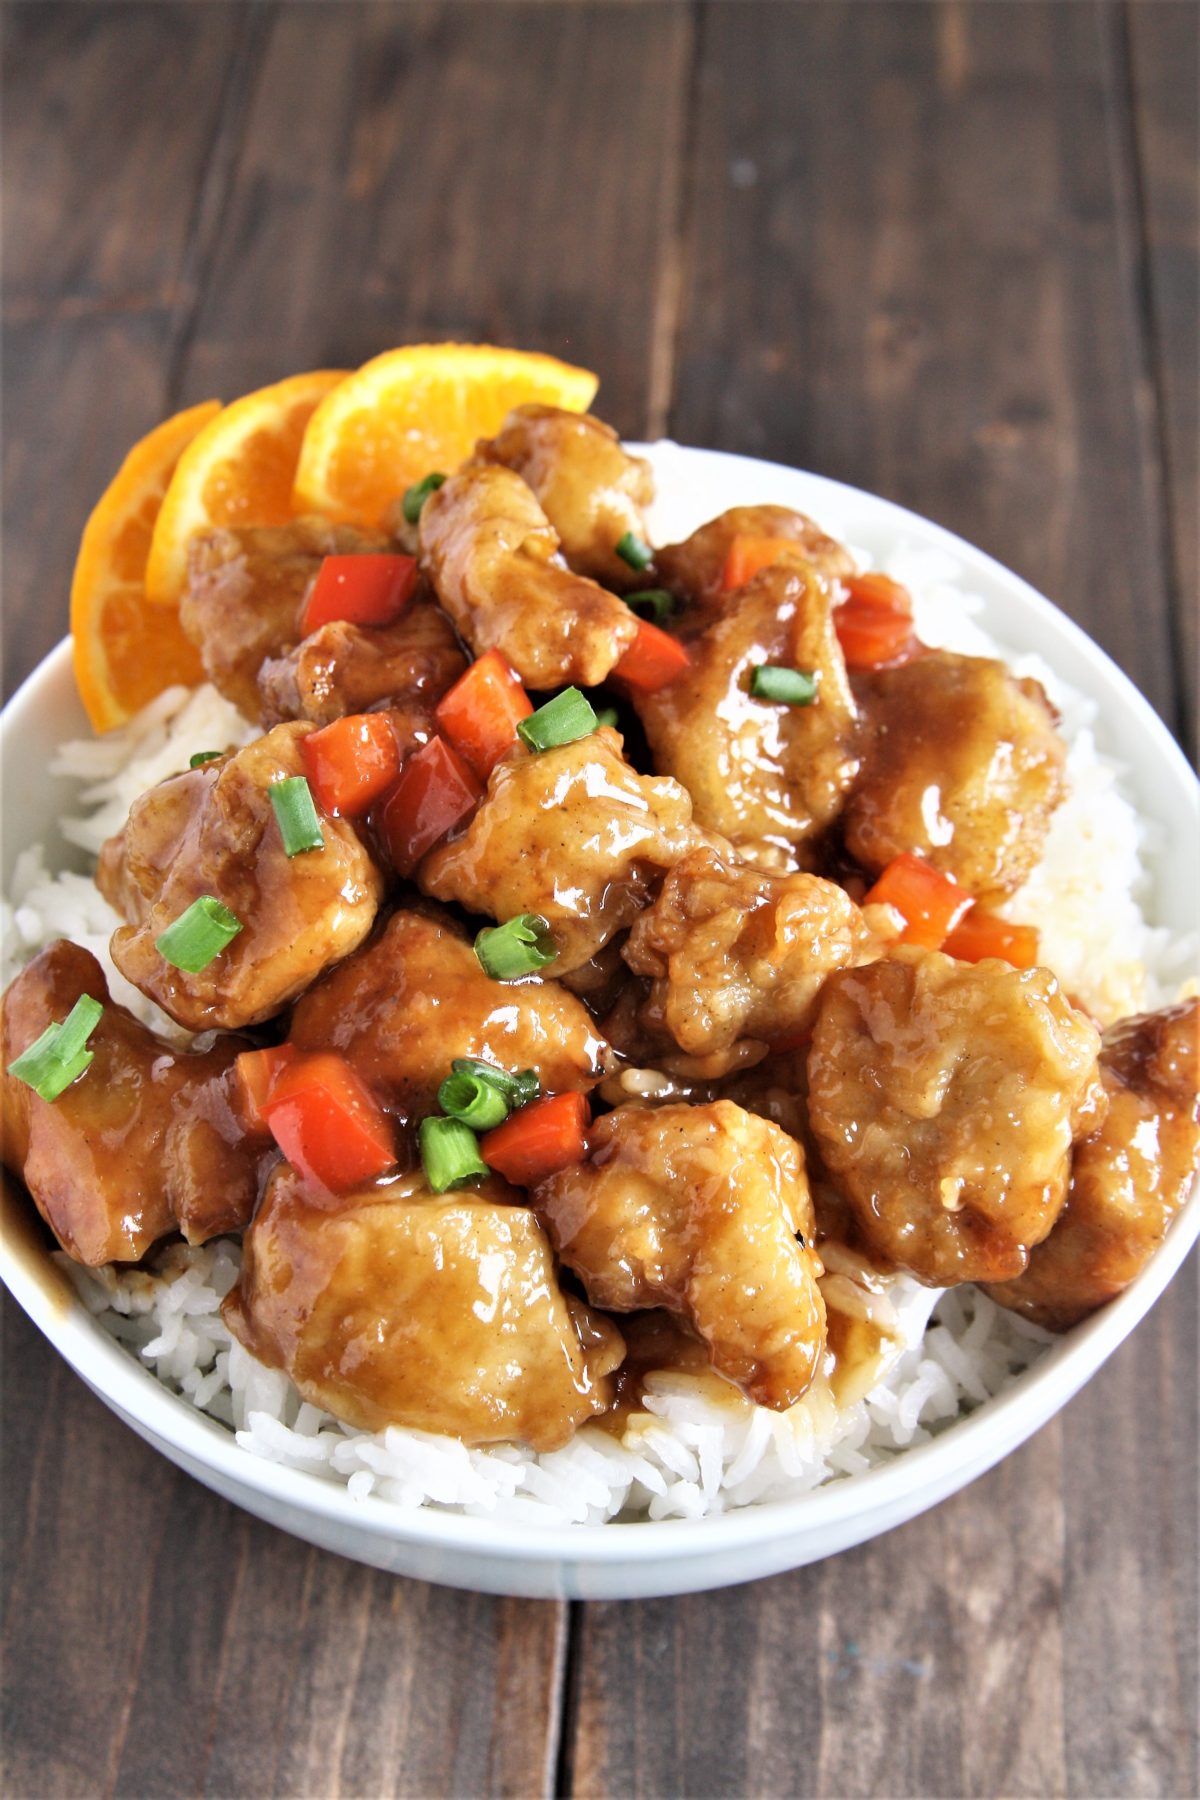 Crispy pieces of fried chicken coated in a delicious sweet and sticky orange sauce, this Panda Express Copycat Orange Chicken will become your new favorite weeknight dinner option!